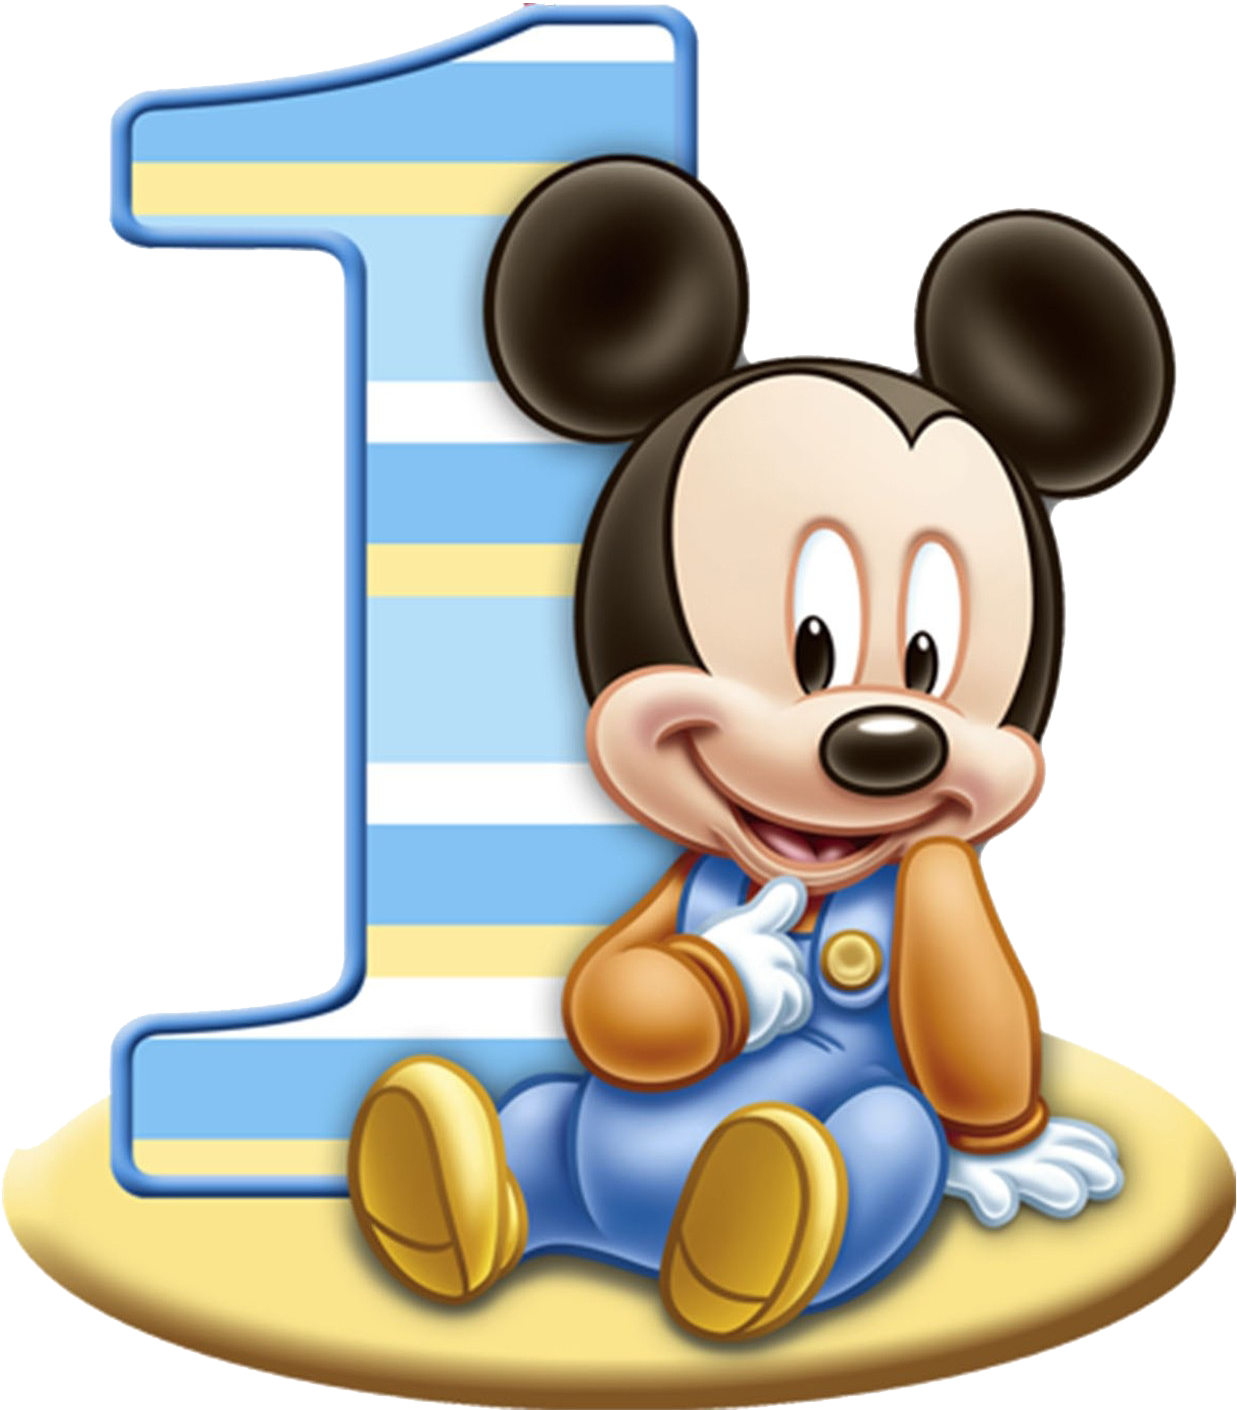 1st Birthday Png Free Download - Baby Mickey Mouse 1st Birthday (1600x1600), Png Download